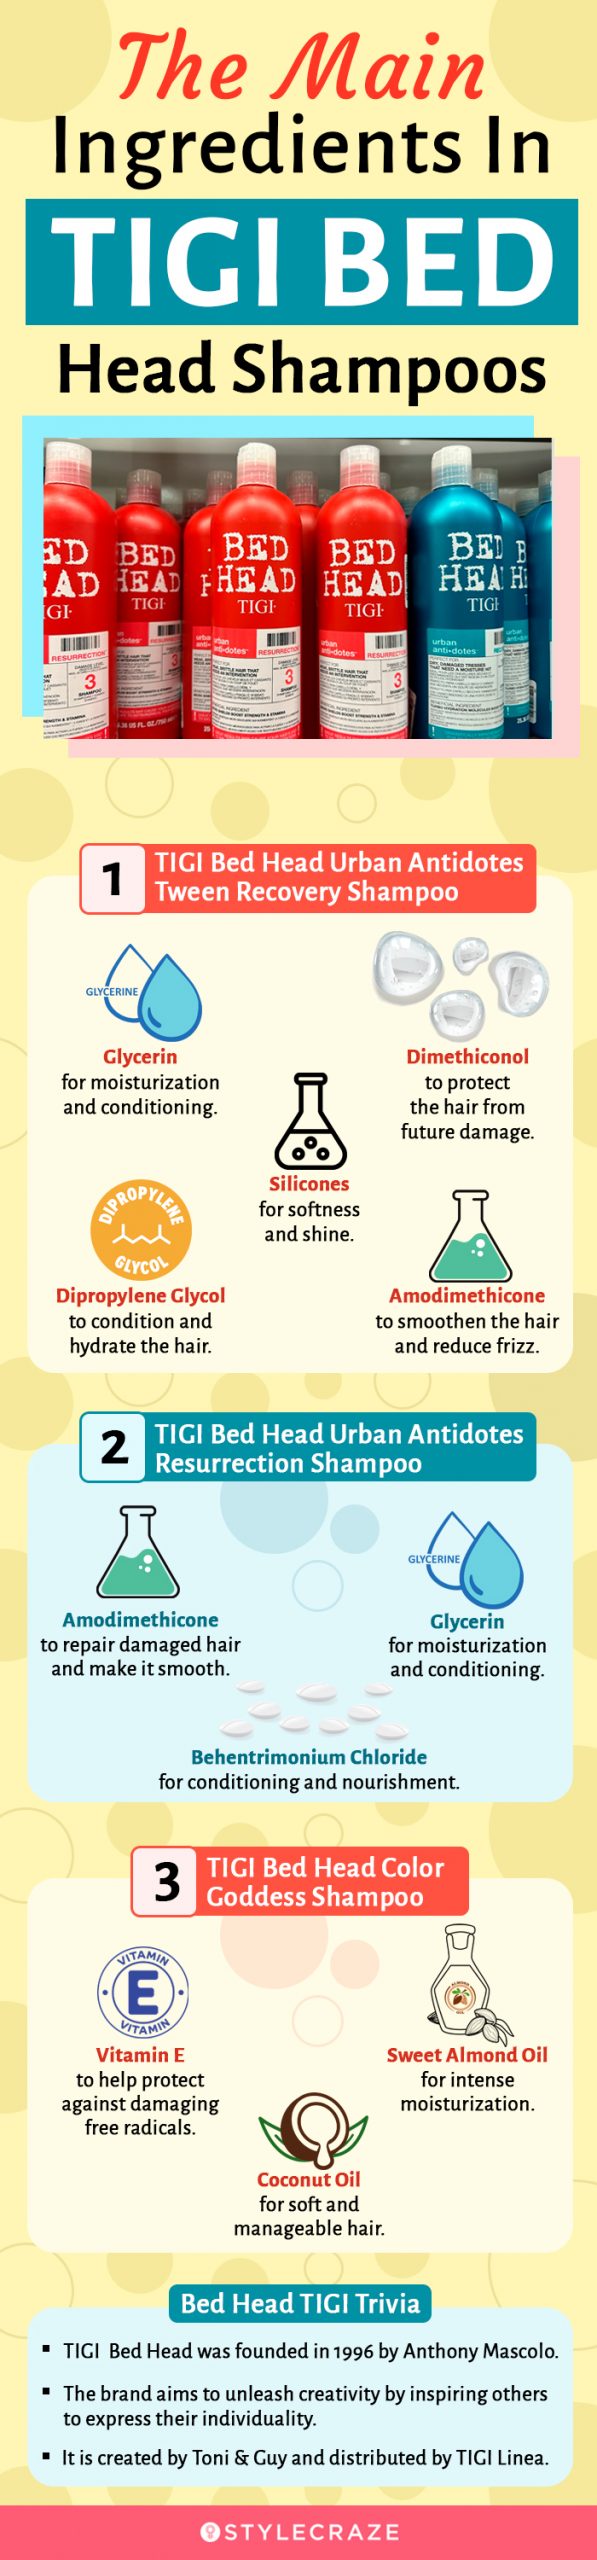 The Main Ingredients In TIGI Bed Head Shampoos (infographic)